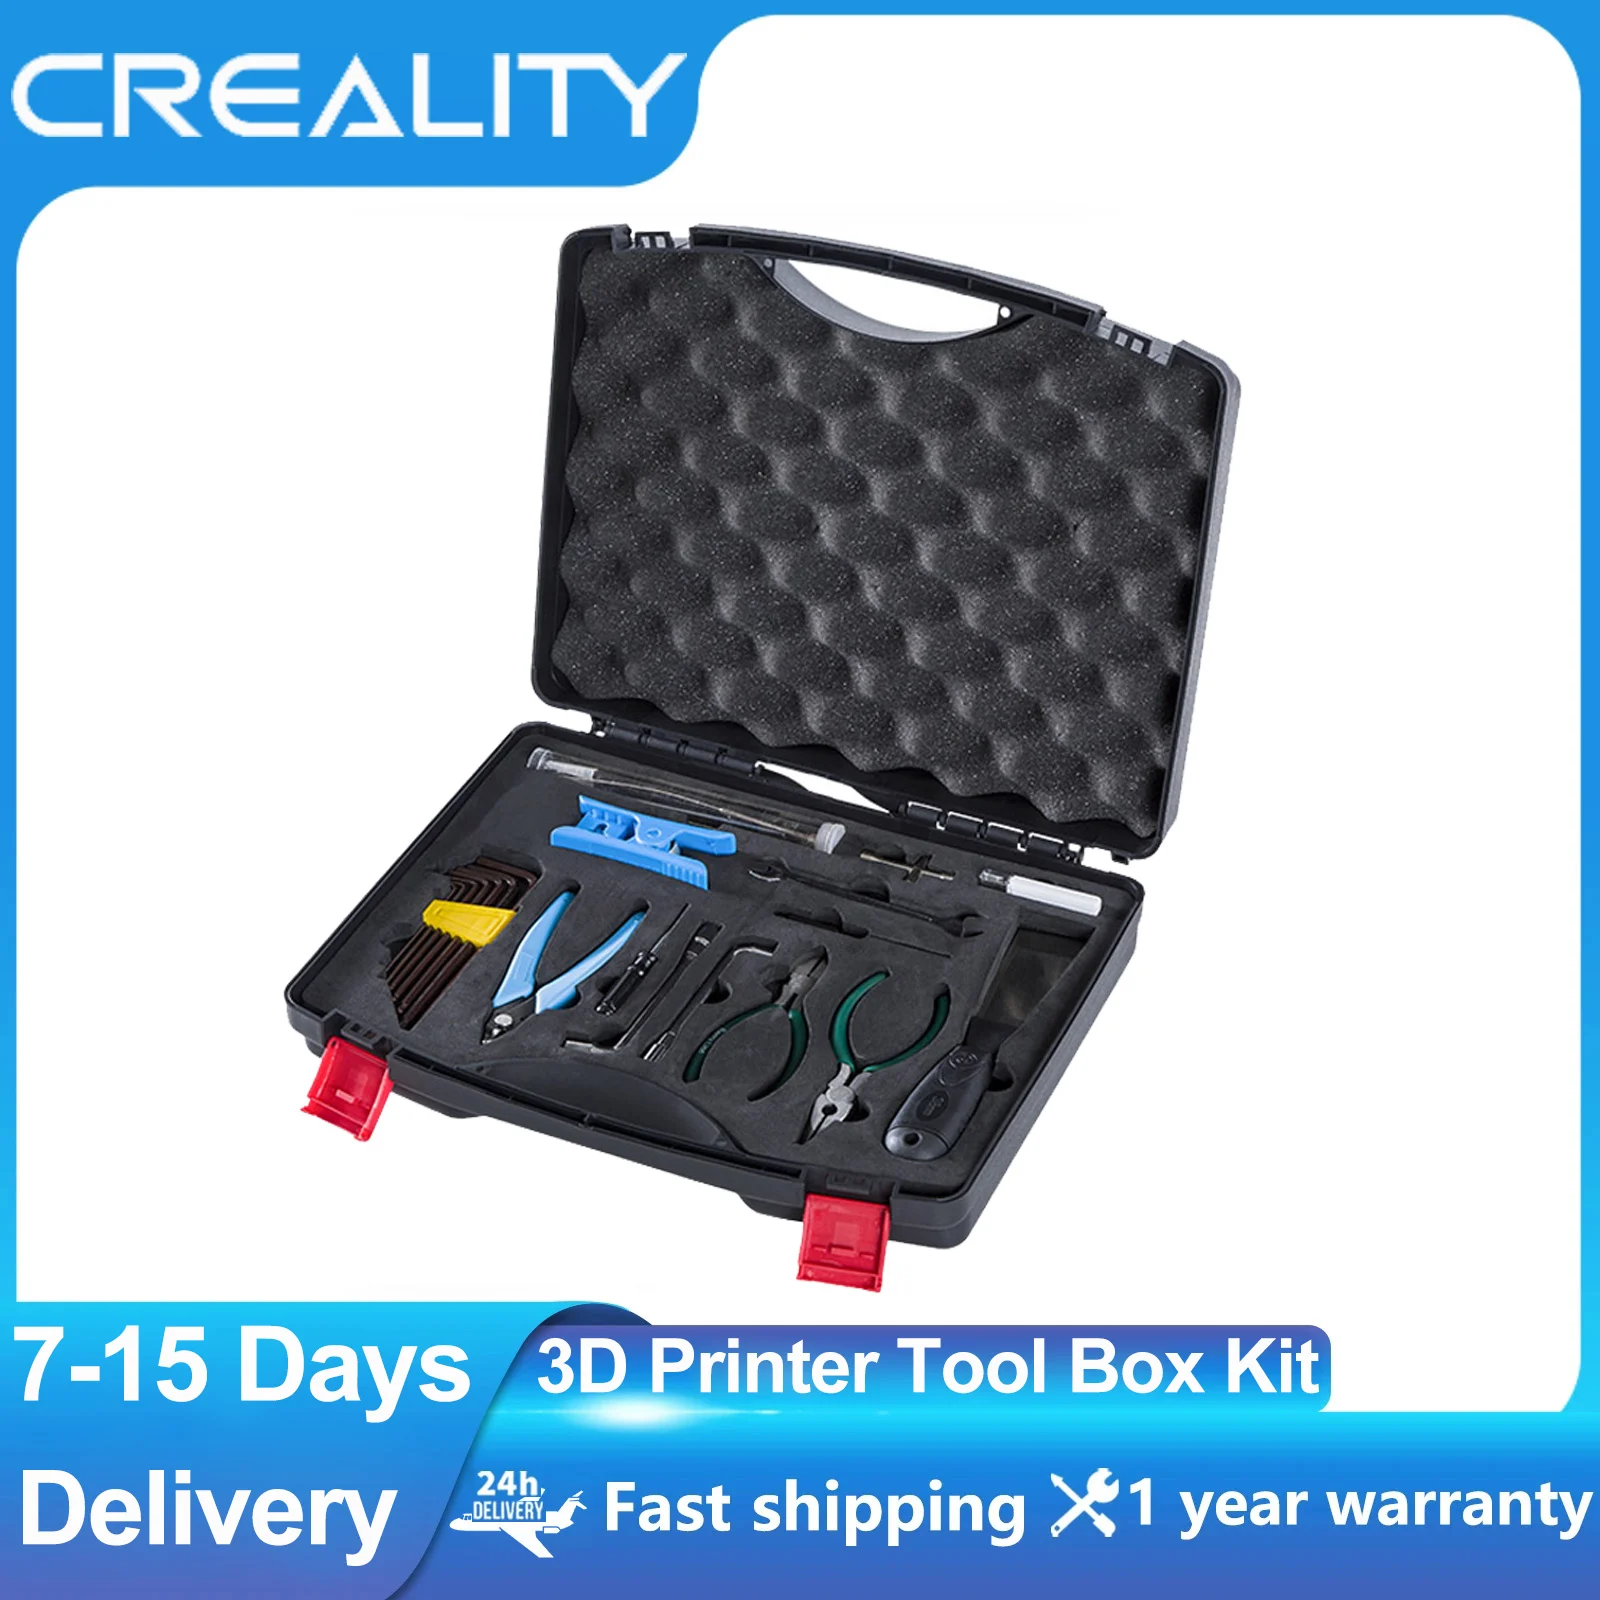 CREALITY 3D Printer Tool Box Kit 18 Types of Tools Screwdriver/Wrench/Pliers/Needle/SD Reader Suit For All 3D Printer Repair Set